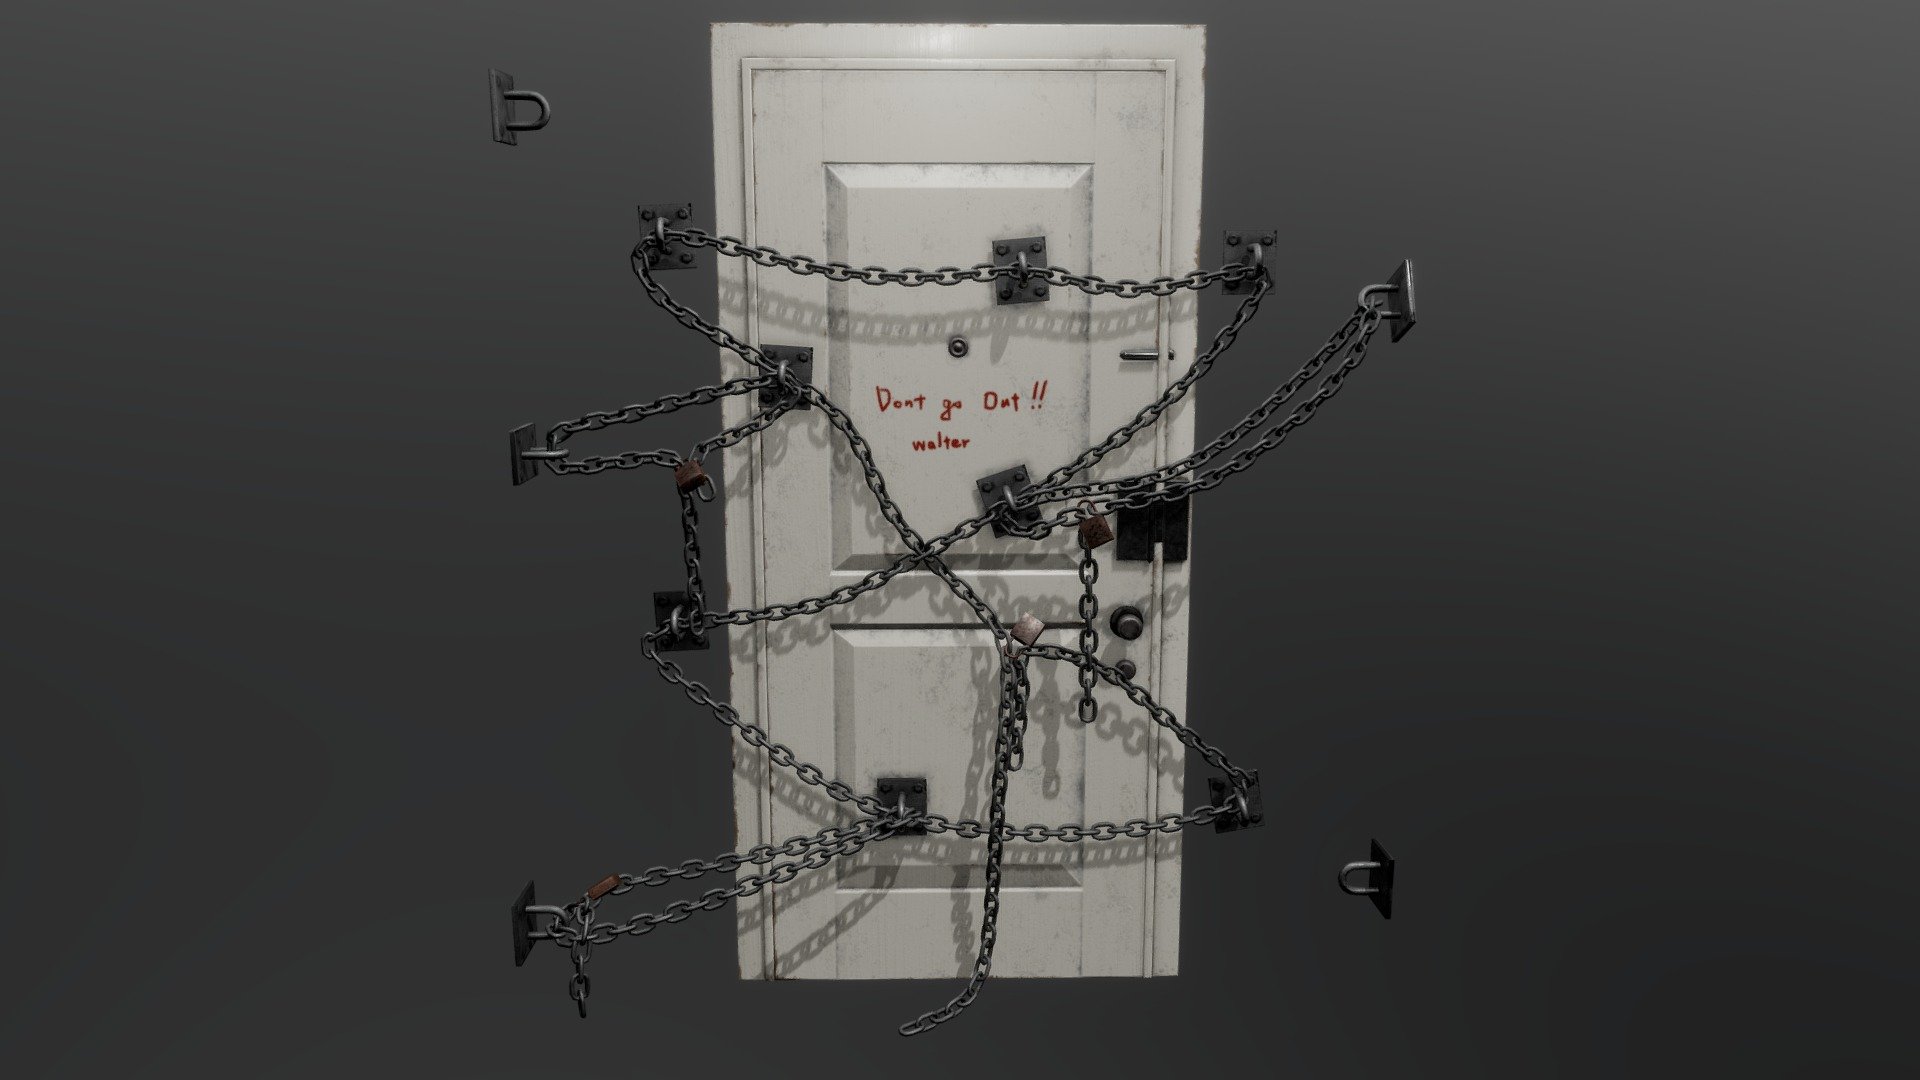 Apartment Door Model from my wip environment based on Silent Hill 4 Room302 3d model